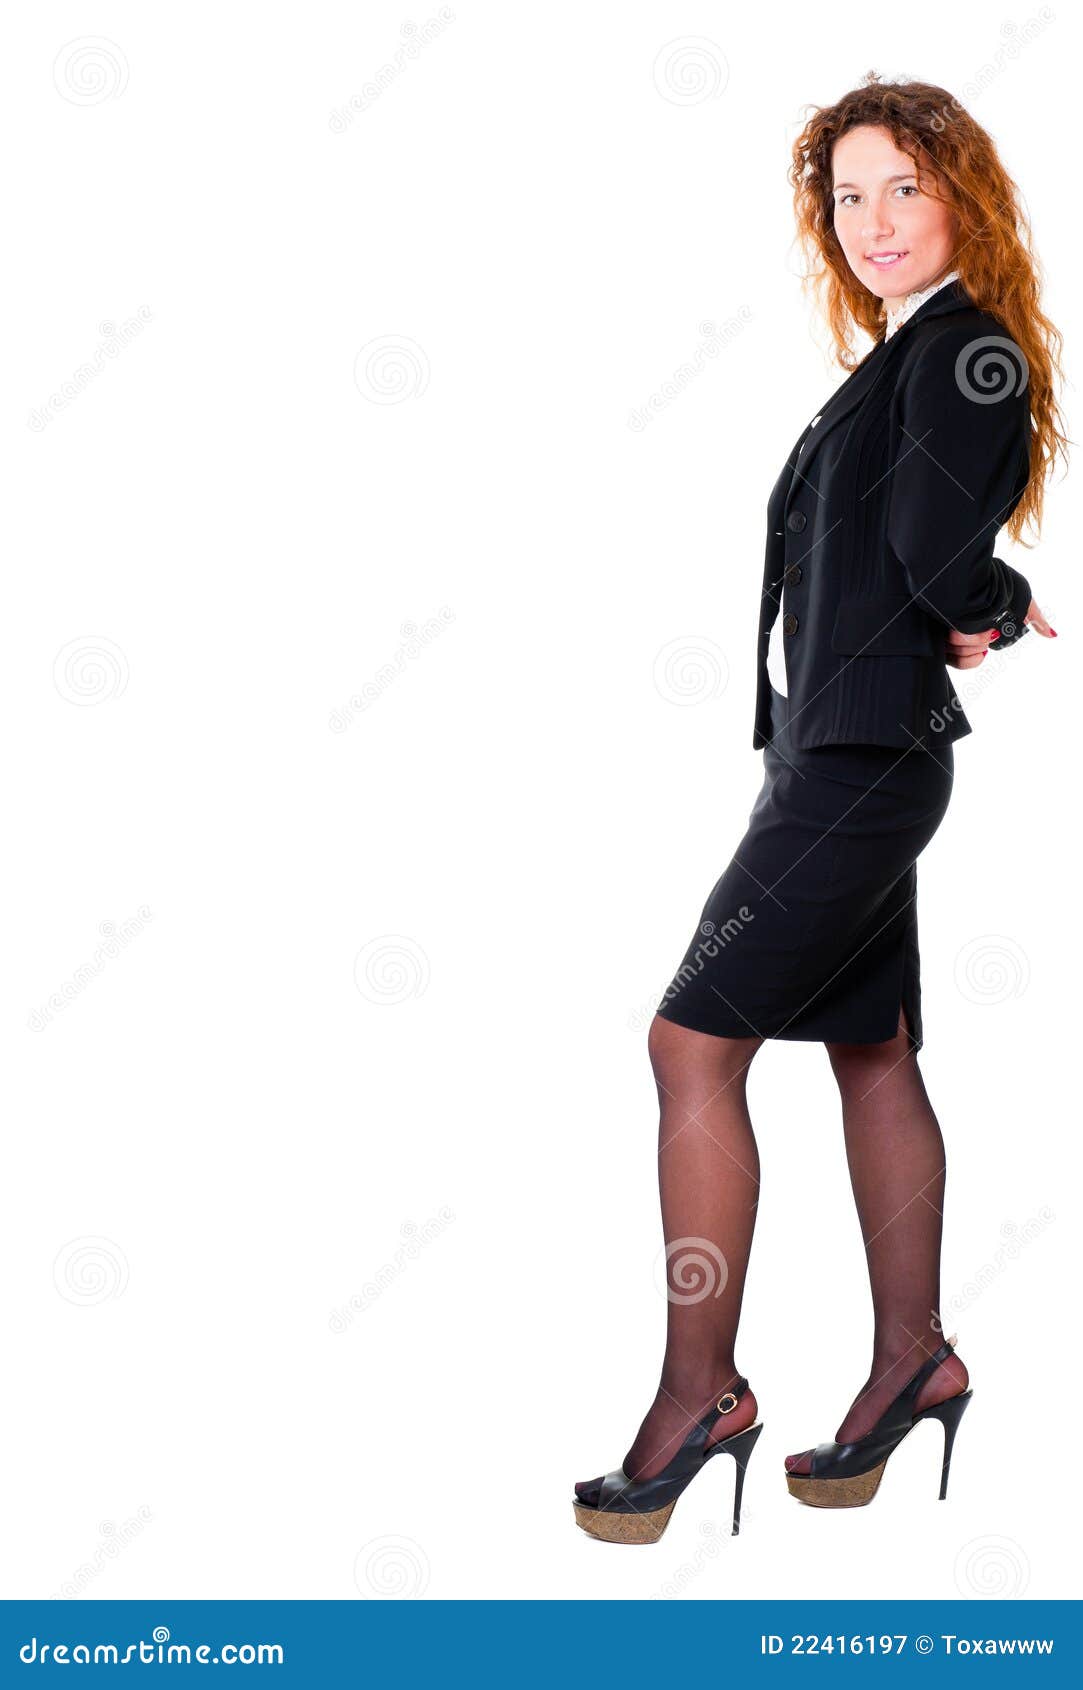 Successful business woman stock image. Image of lady - 22416197